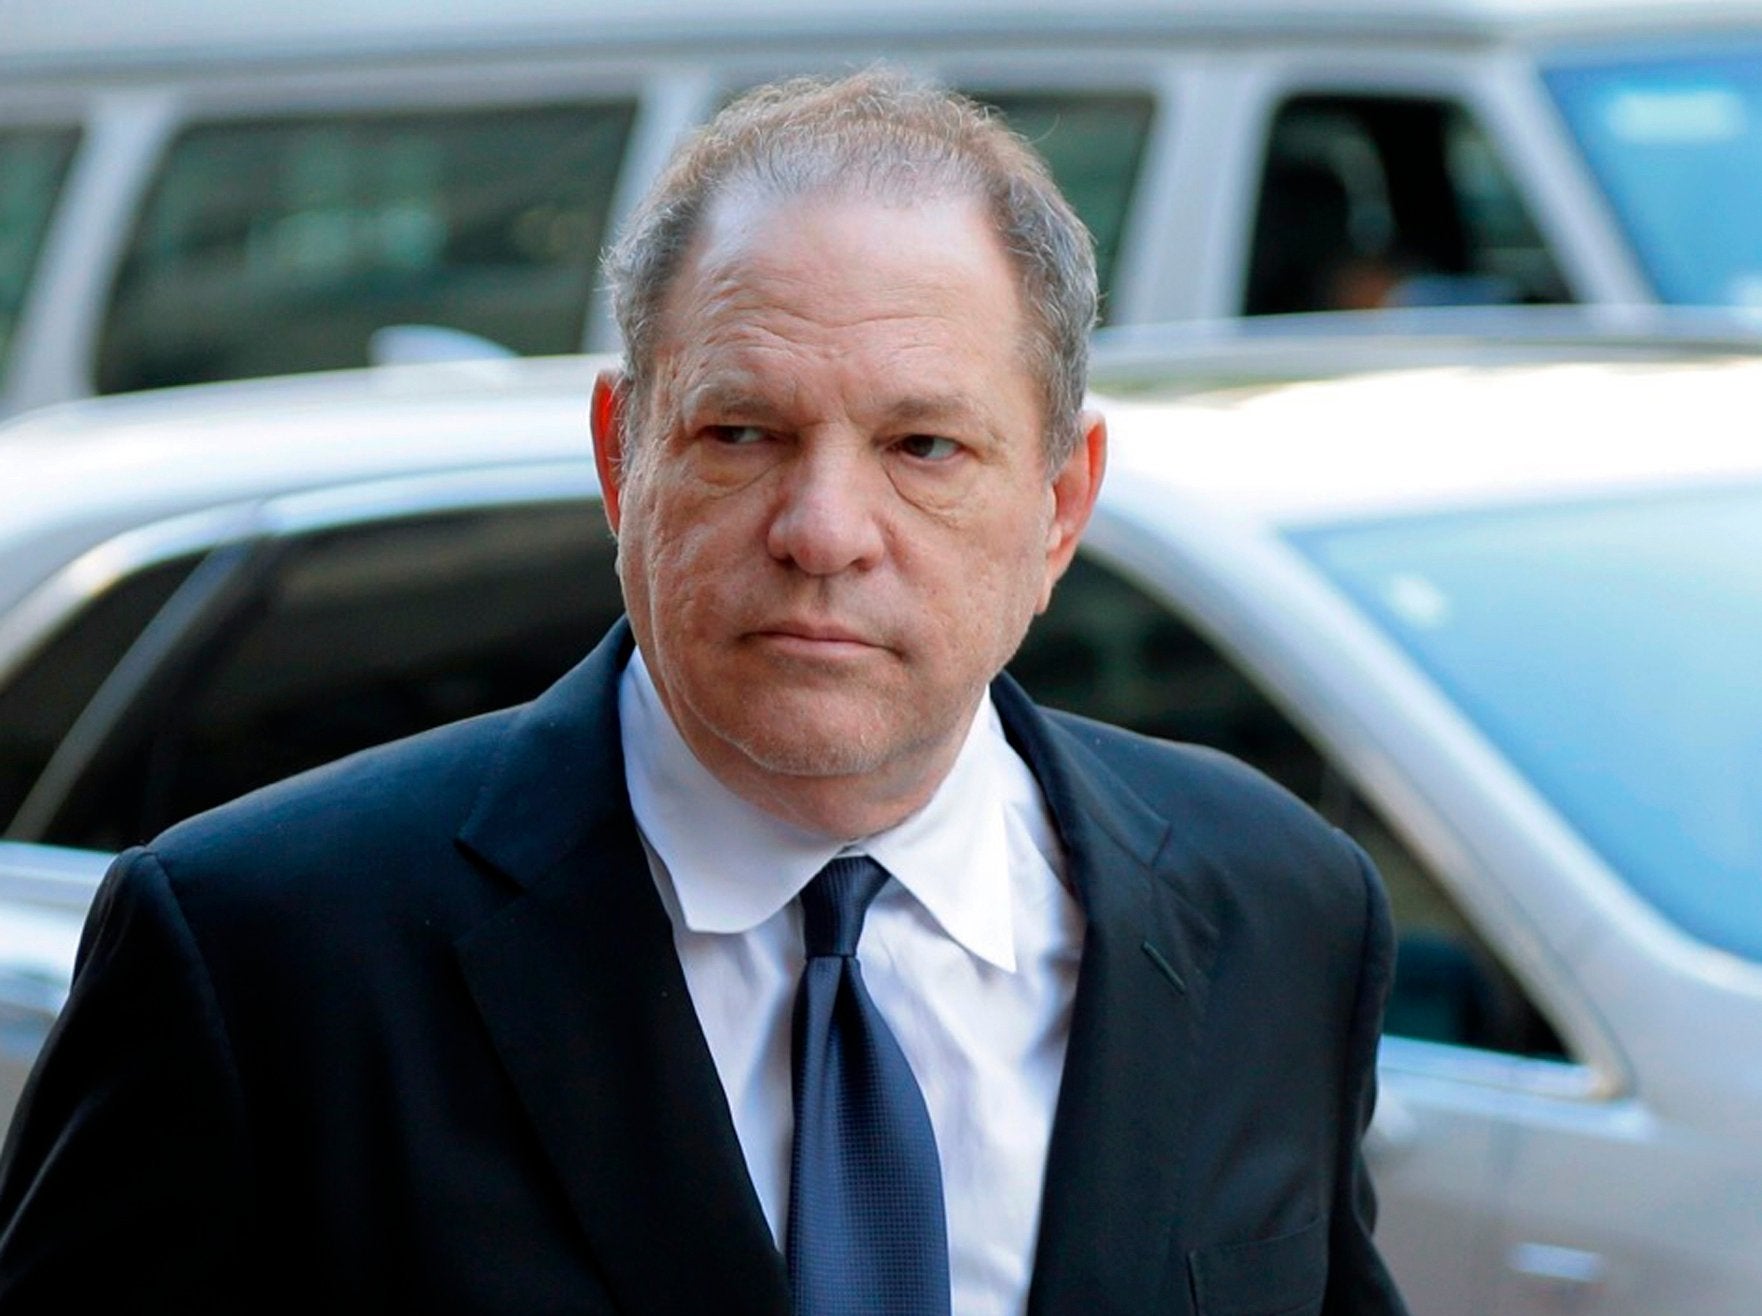 Harvey Weinstein sent emails to several individuals about the criminal case against him in New York